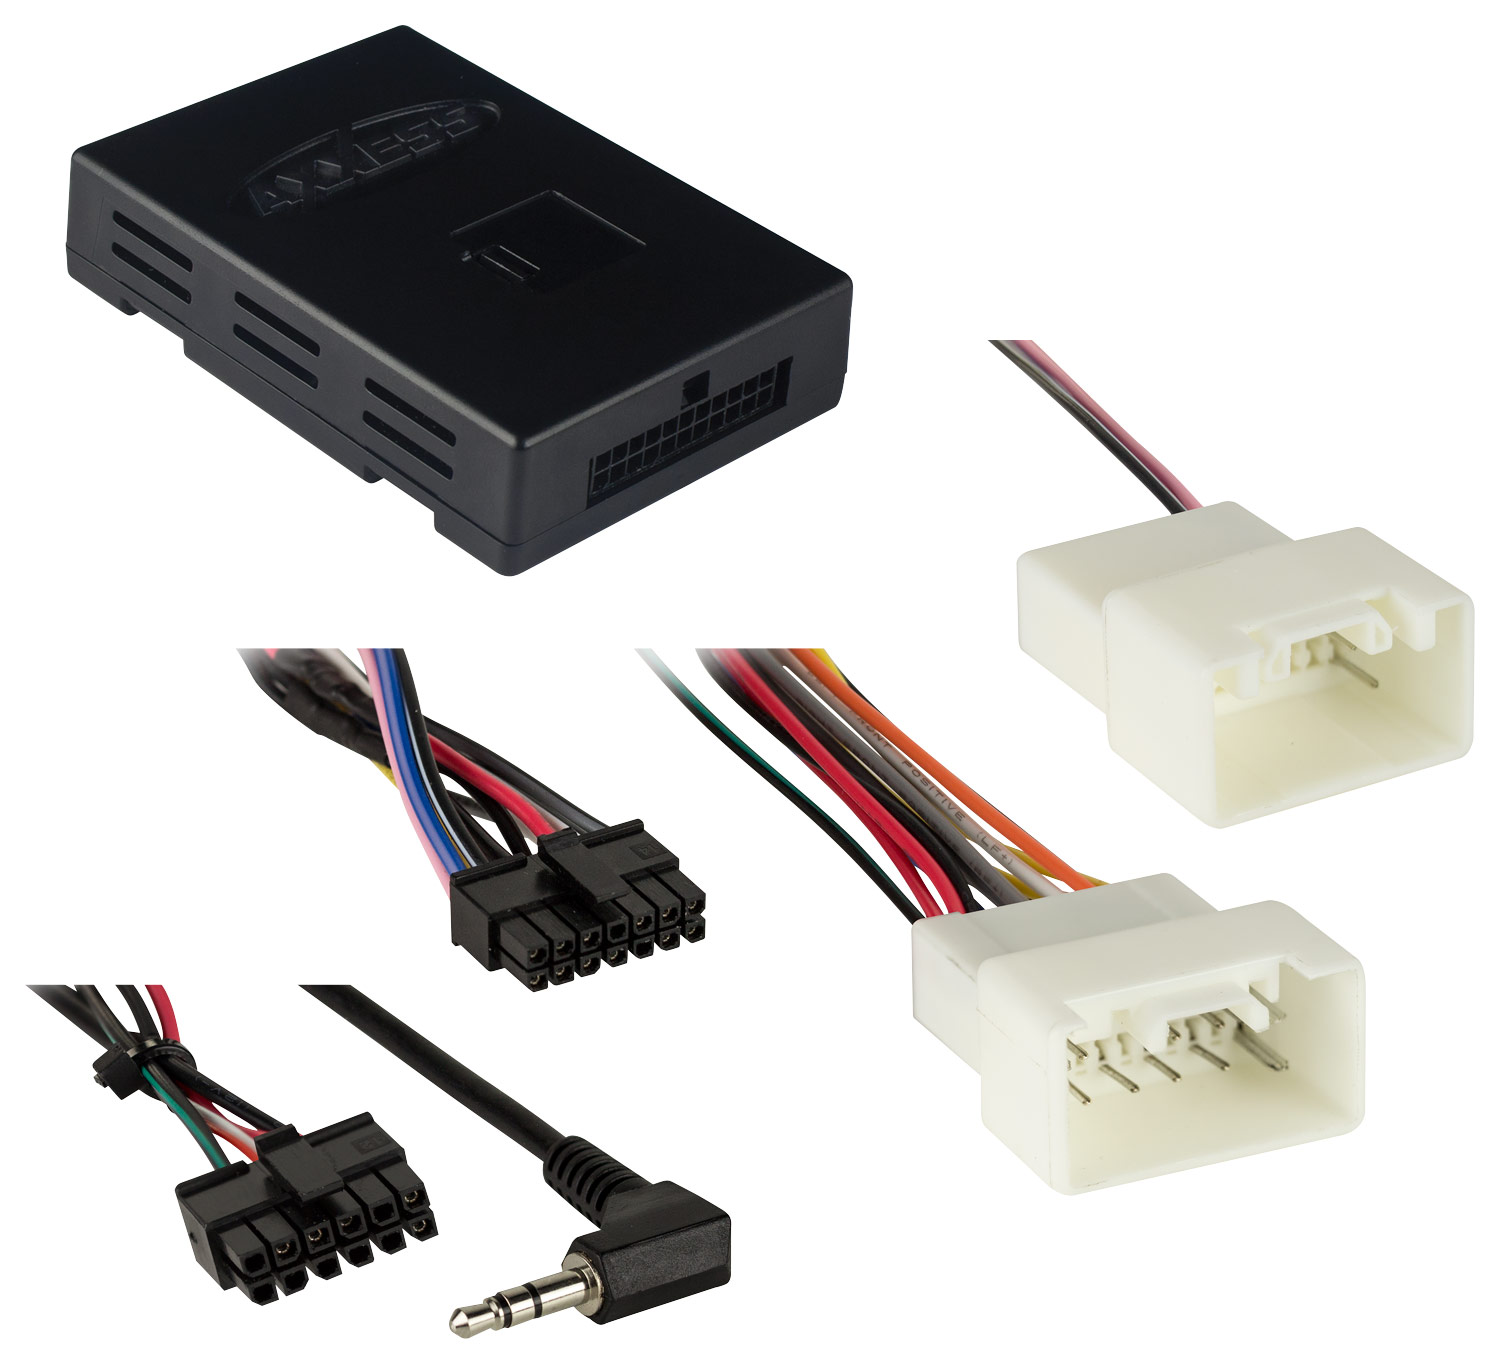 AXXESS - Amplifier Interface for 2014 and Later Mitsubishi Vehicles - Multi was $99.99 now $74.99 (25.0% off)